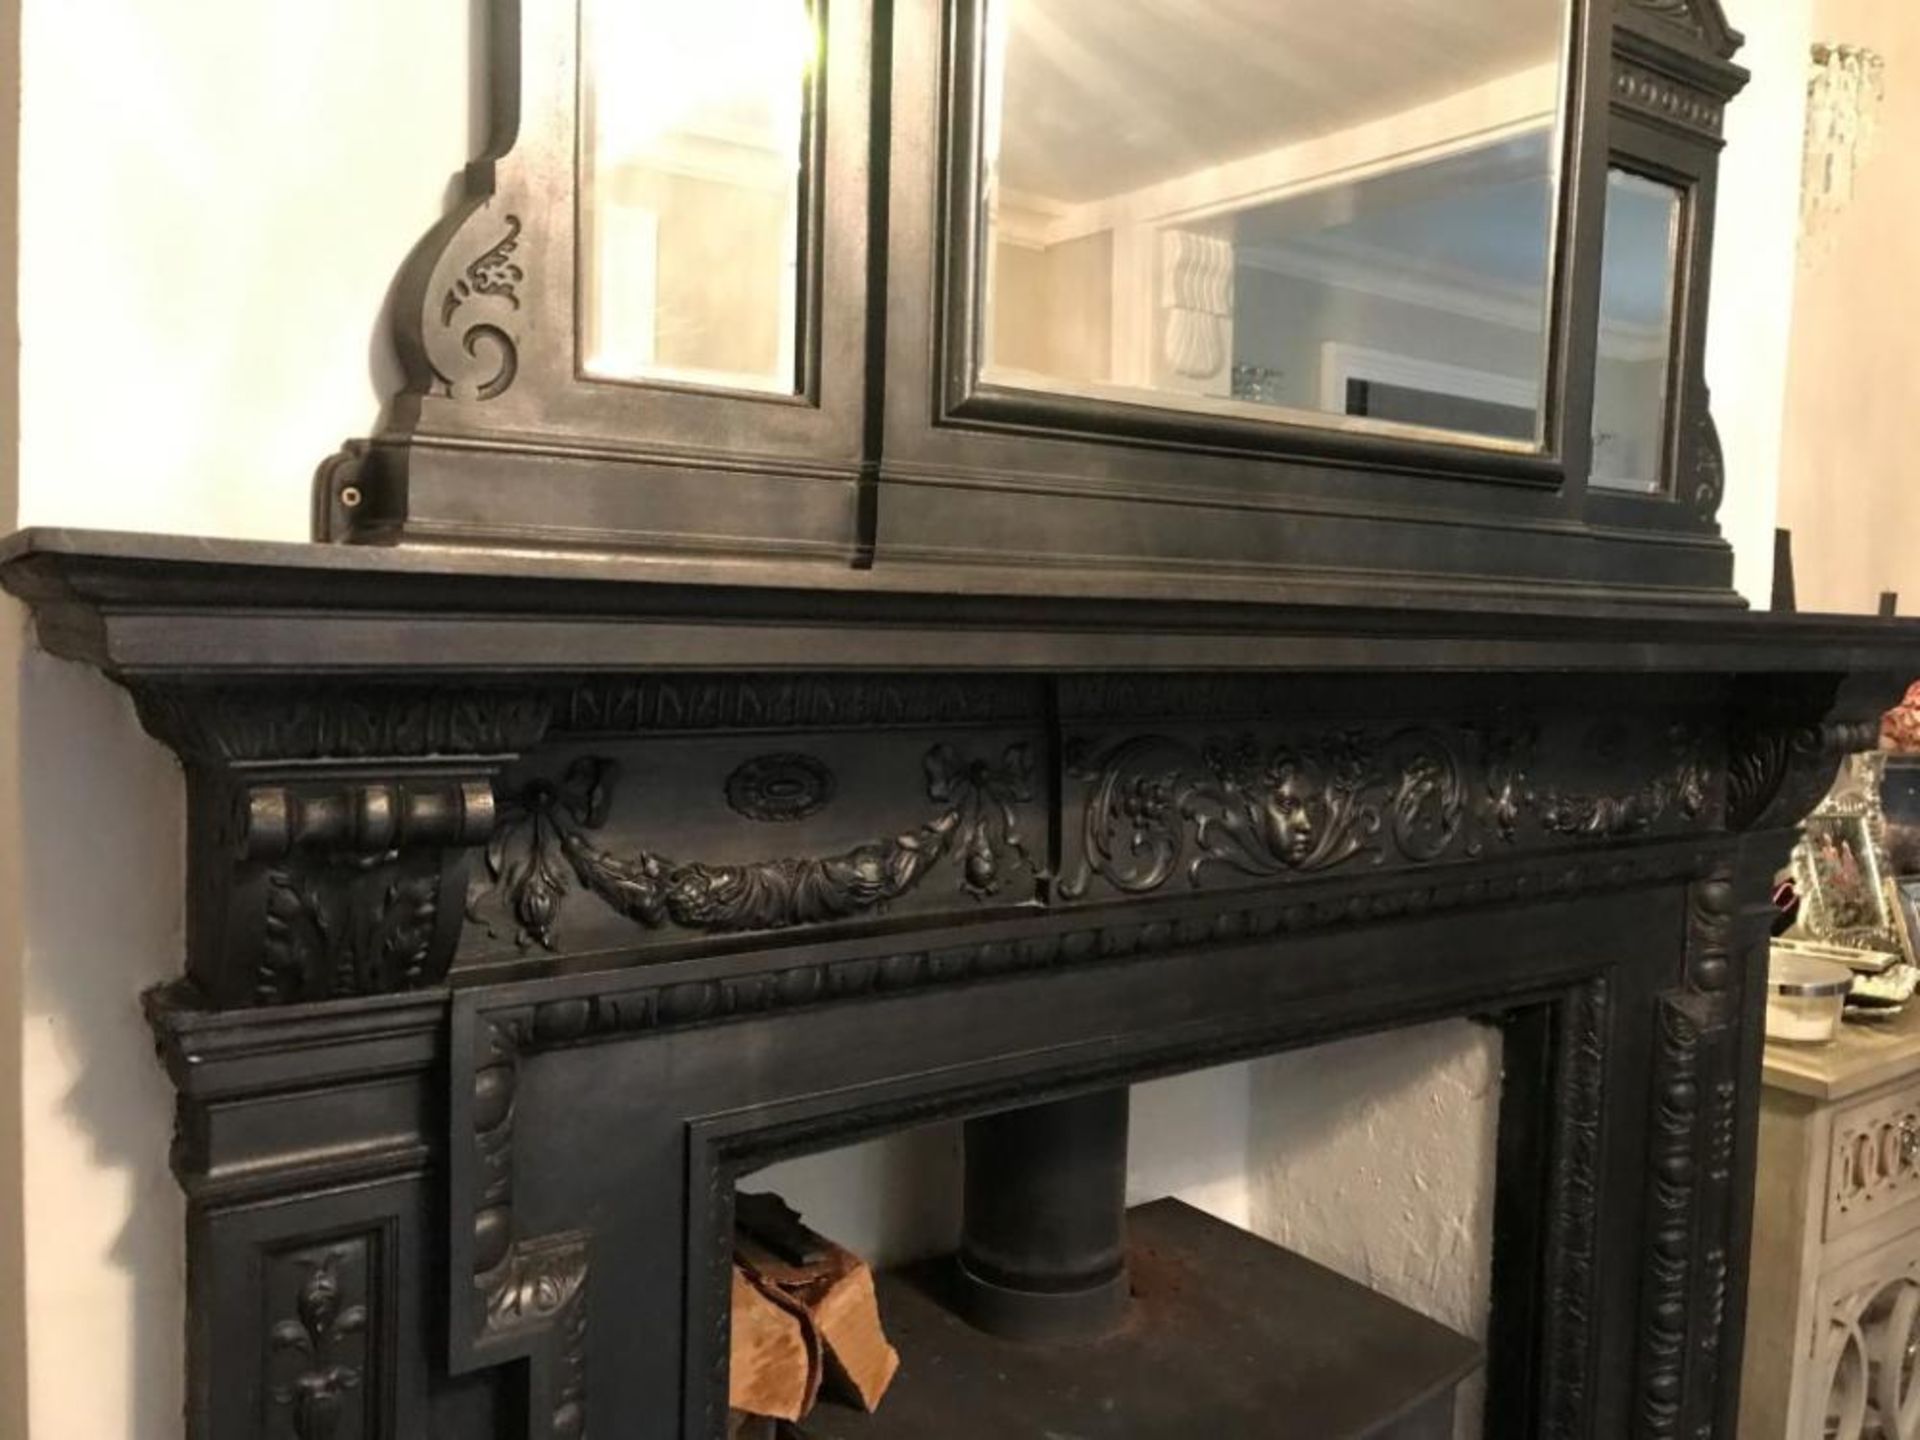 1 x Ultra Rare Stunningly Ornate Antique Victorian Cast Iron Fireplace, With Matching Cast Iron Mirr - Image 17 of 23